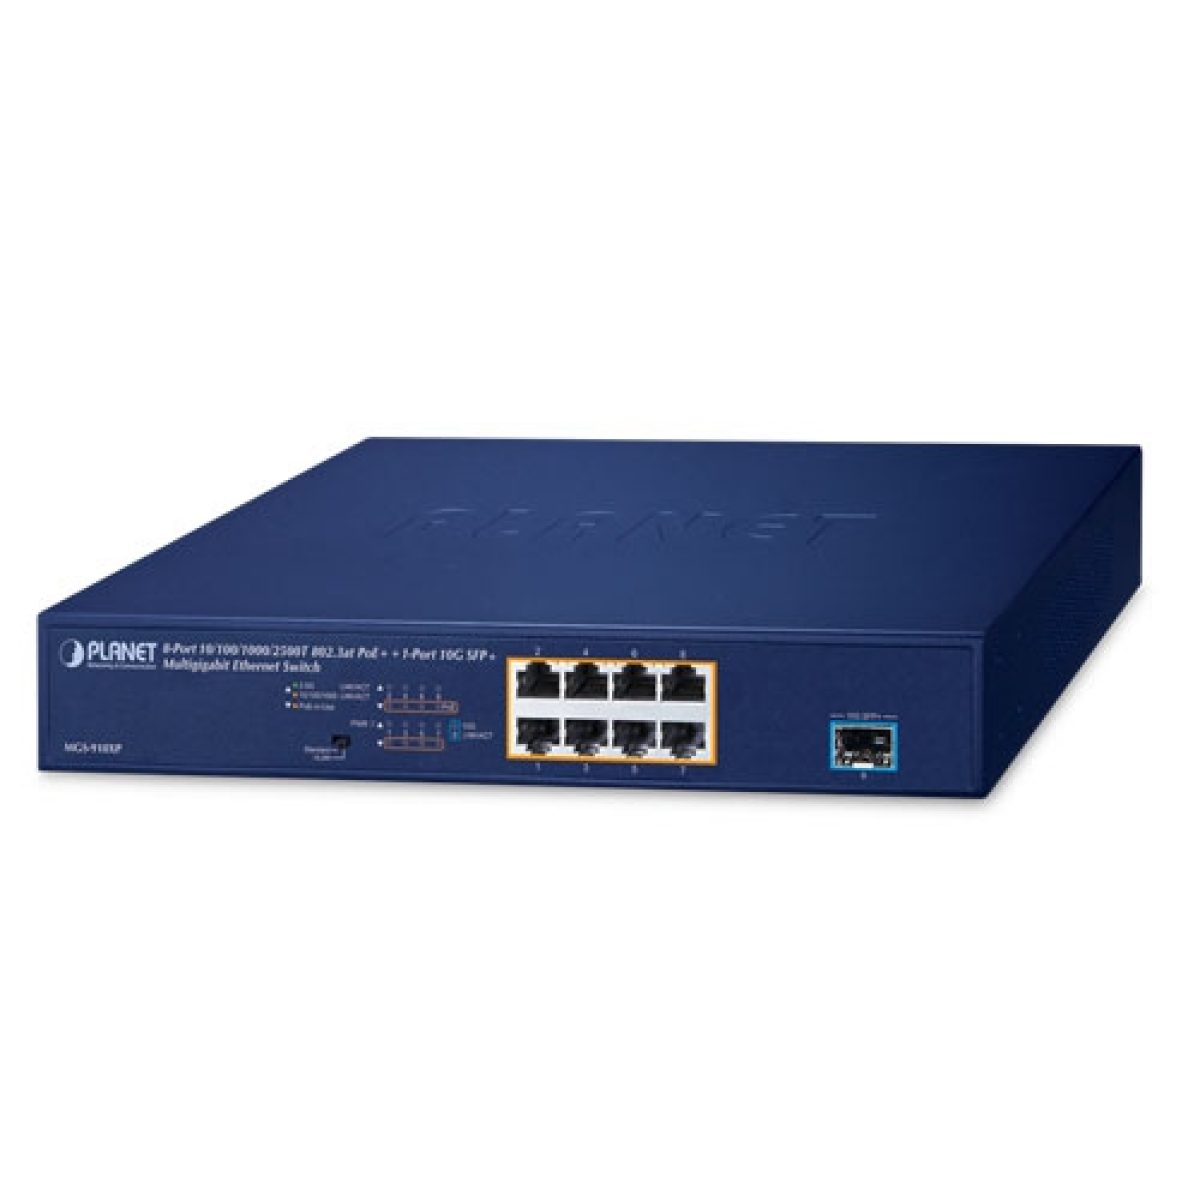 Managed 2.5Gbps Poe Switch With 4 10/100/1000/2500M RJ45 PoE+ Ports And 1